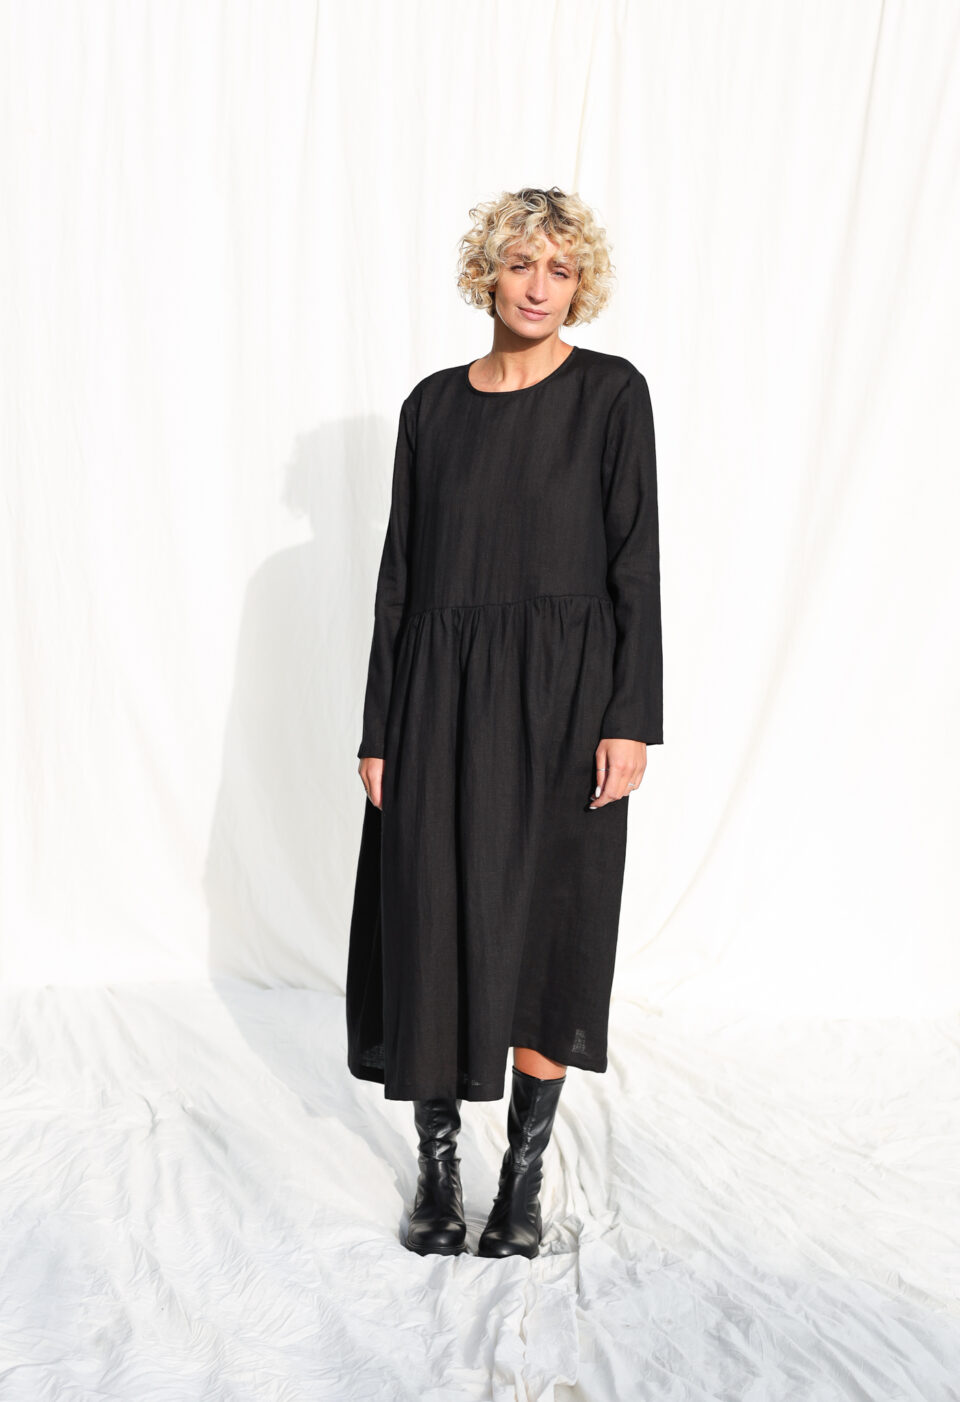 Black linen loose fit smock dress MILANA | Dress | Sustainable clothing | OffOn clothing